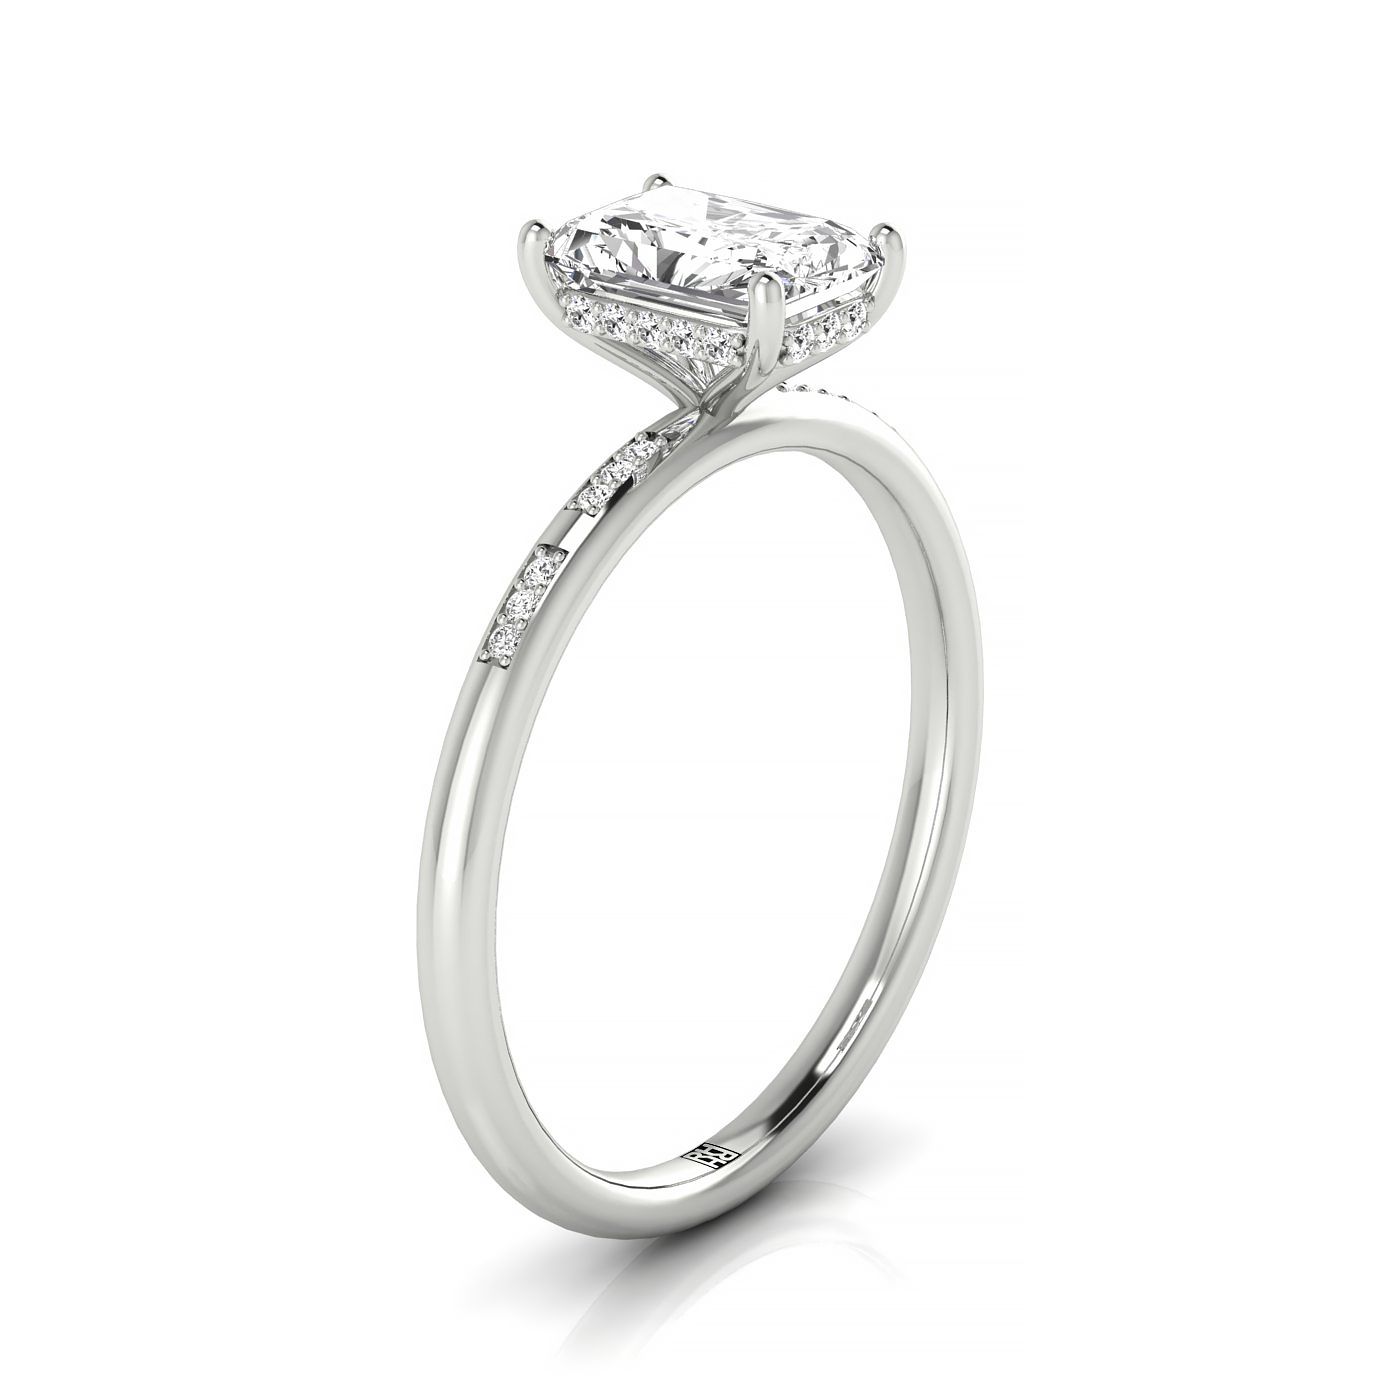 Plat Radiant Engagement Ring With High Hidden Halo With 36 Prong Set Round Diamonds